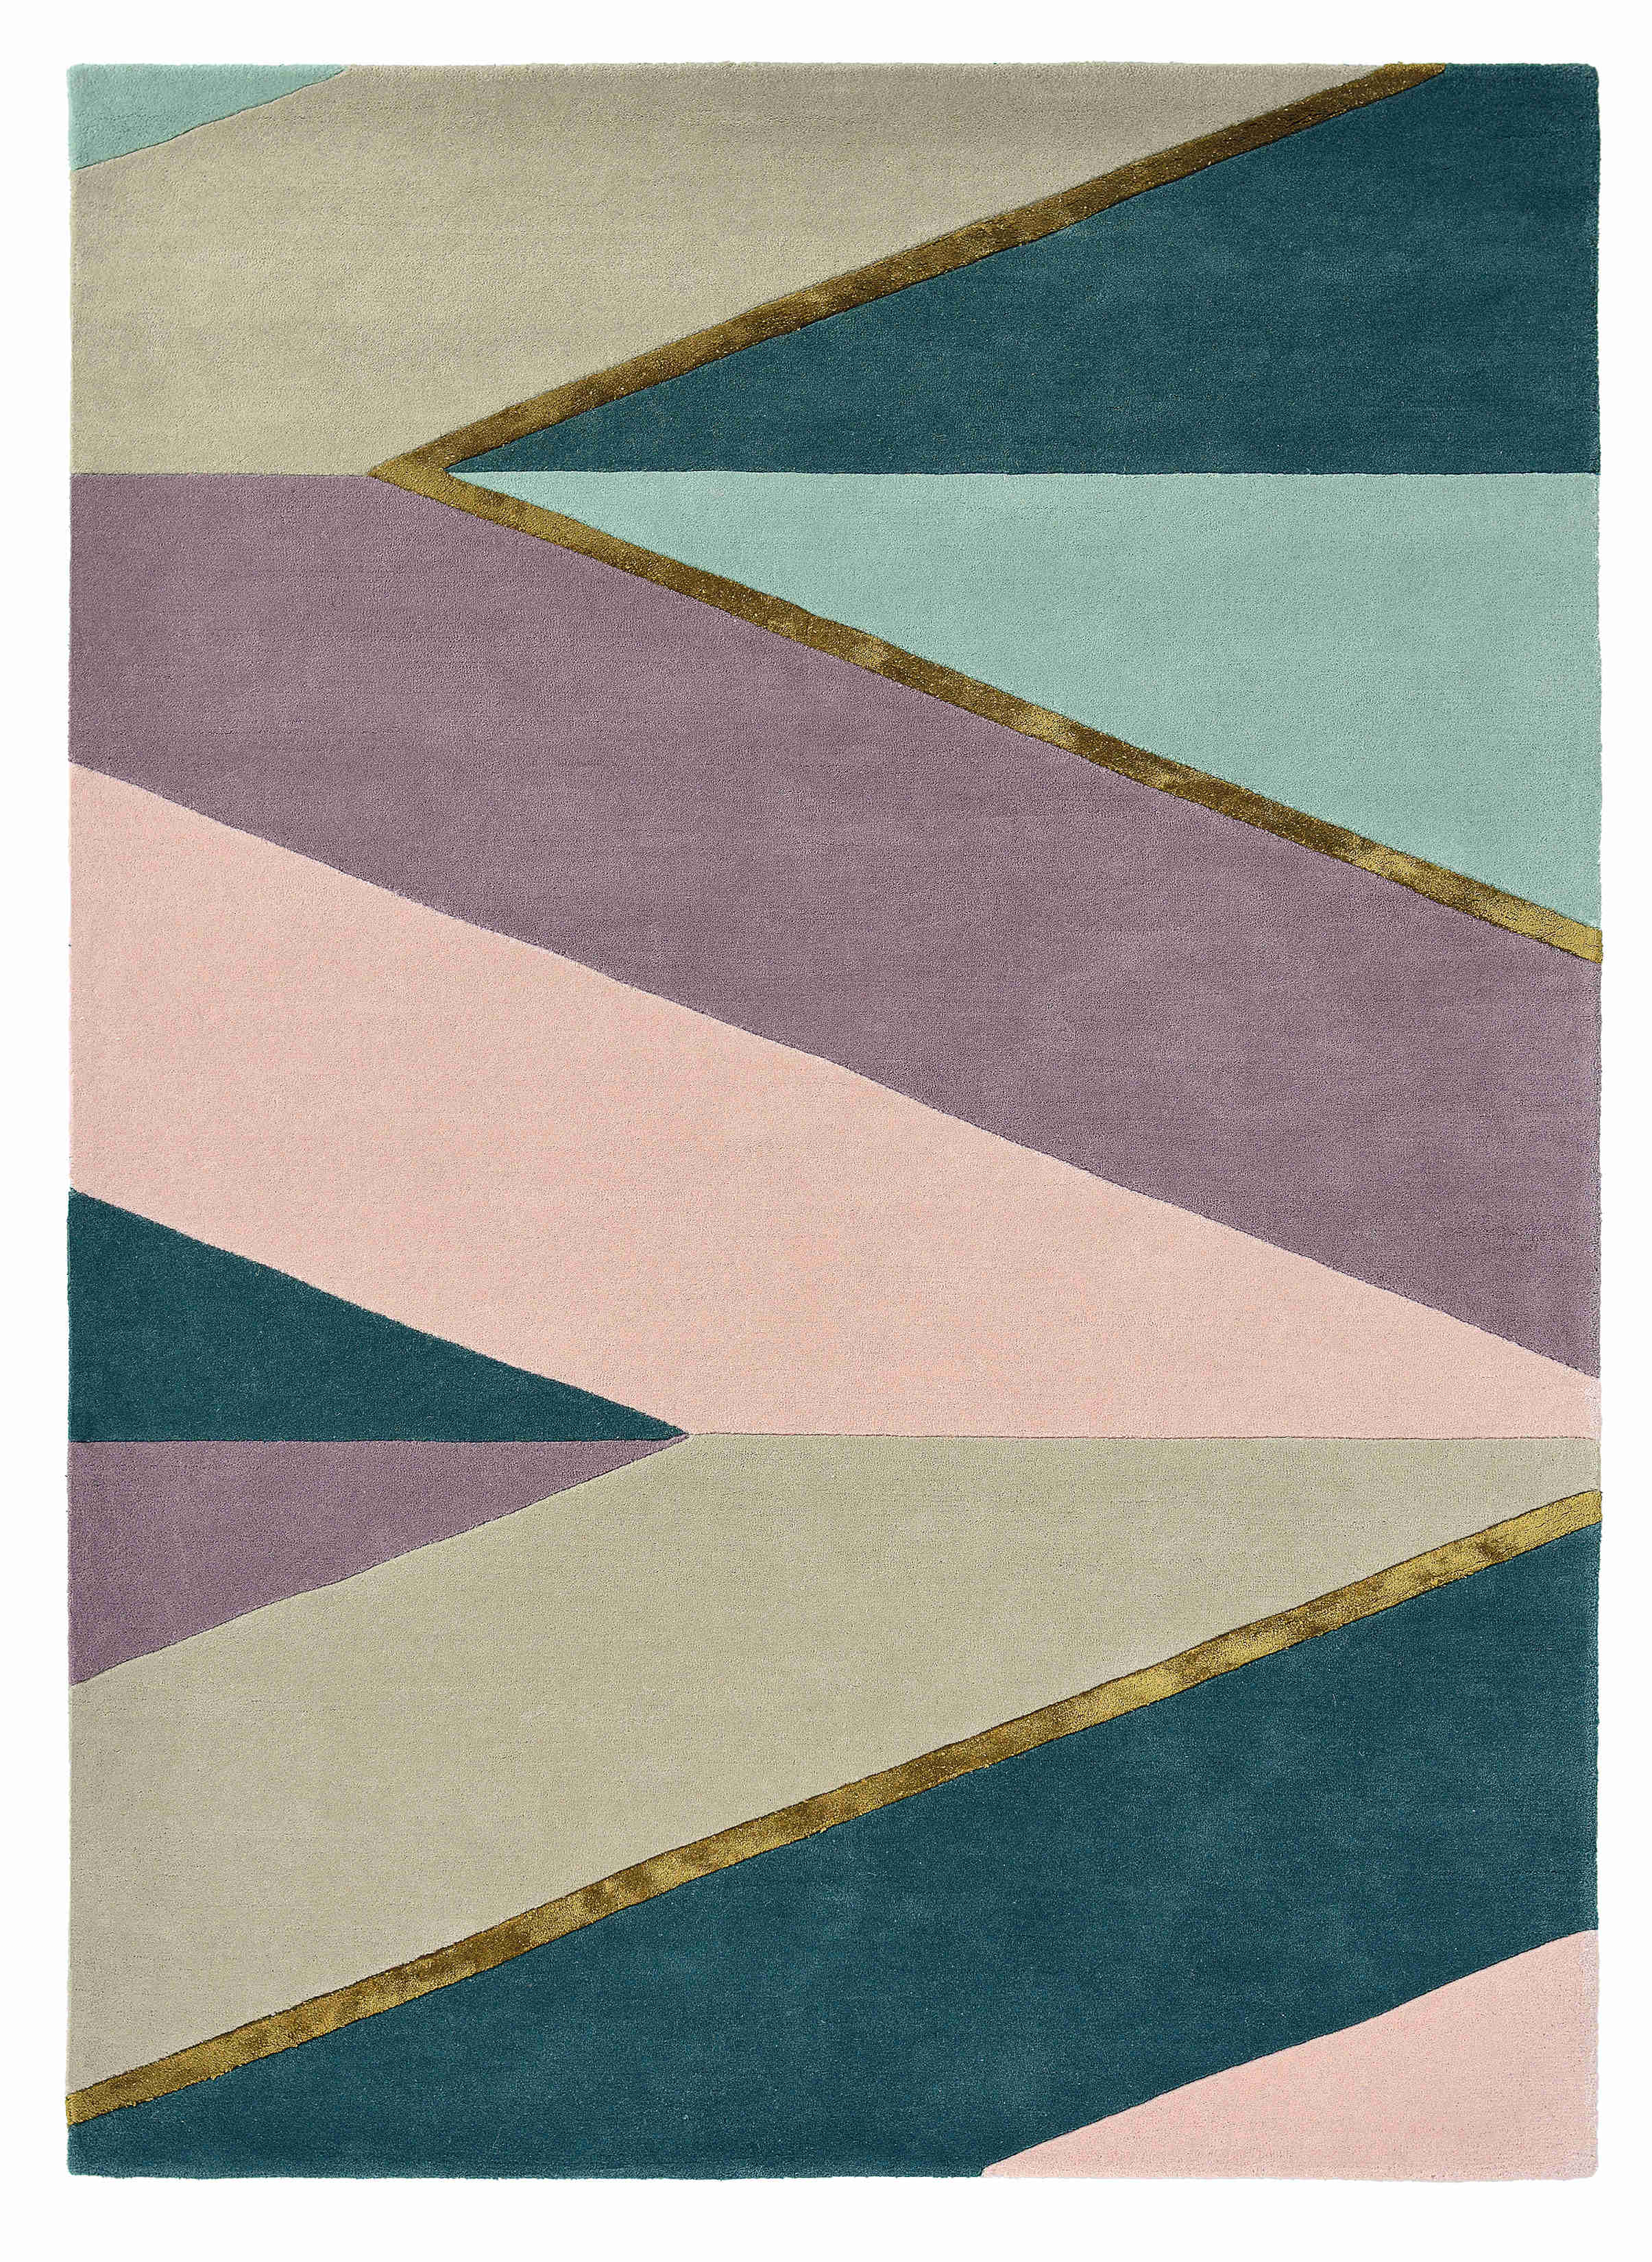 Rectangular rug with geometric stripe pattern in green, teal, grey and purple. Gold details.